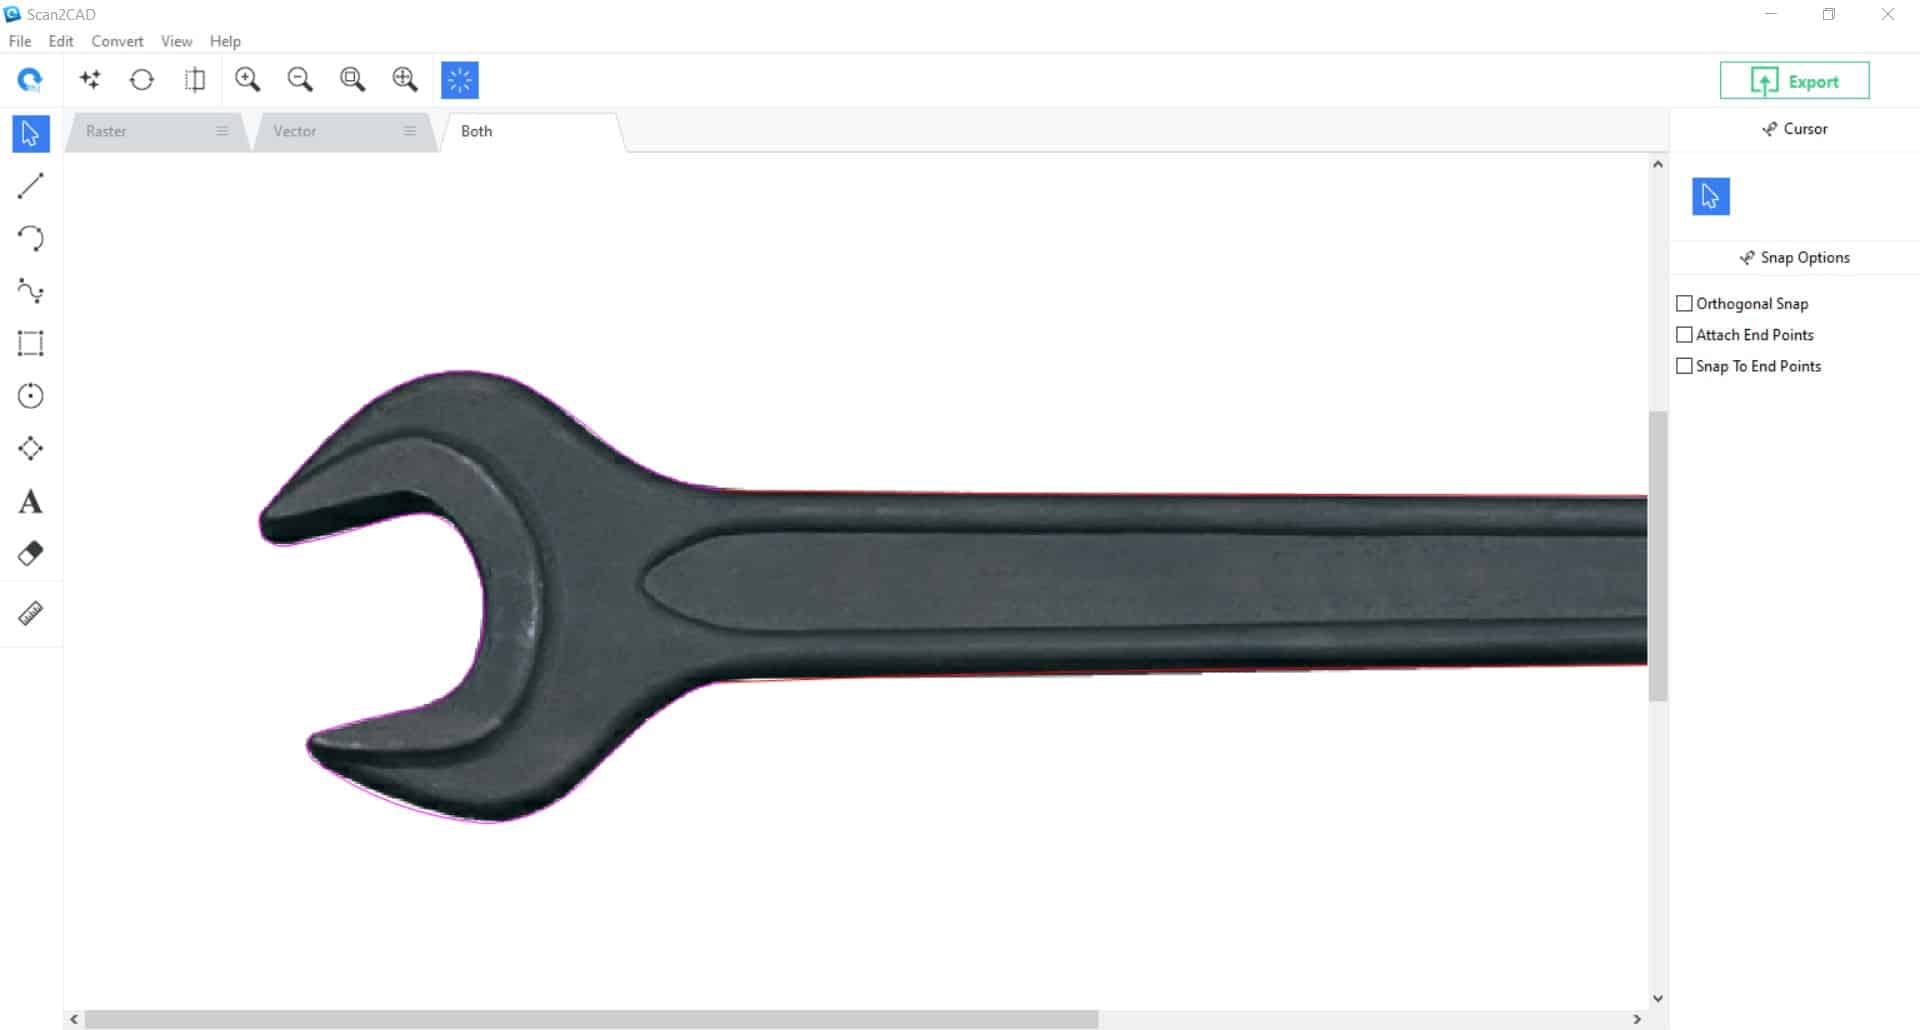 Converting a spanner image with Scan2CAD